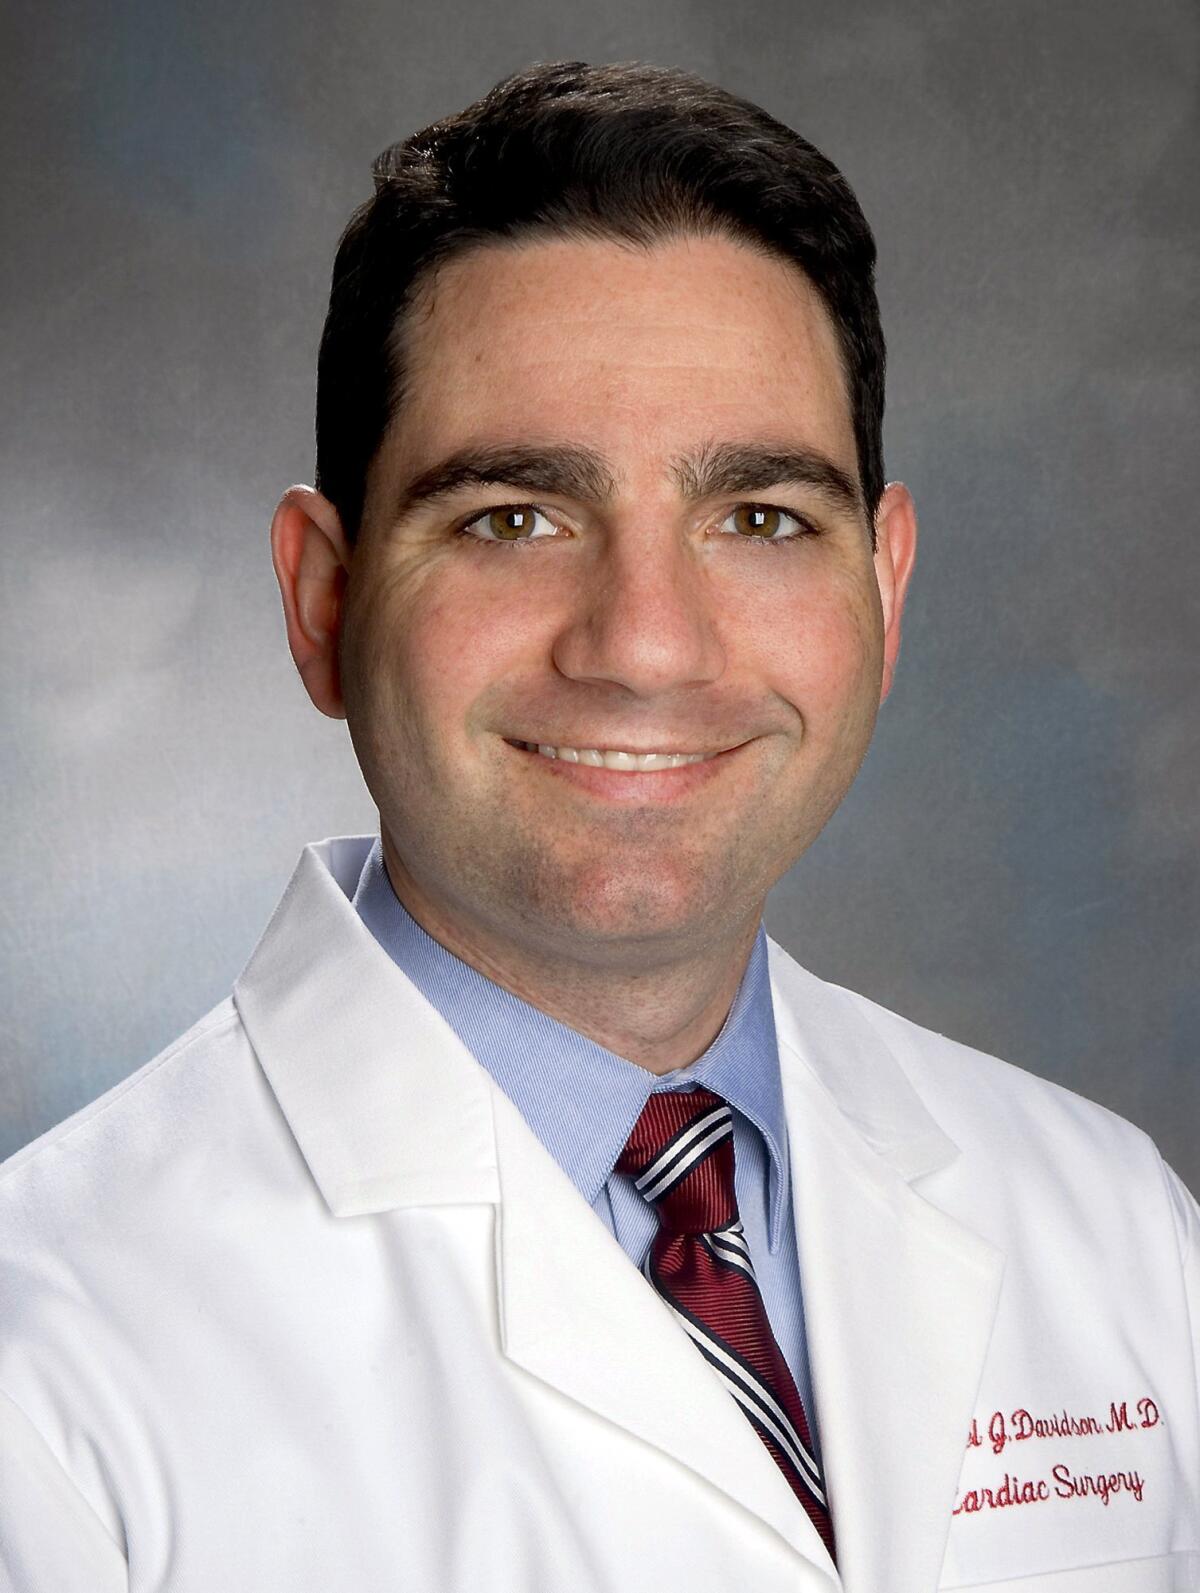 Michael Davidson, director of endovascular cardiac surgery at Brigham and Women's Hospital in Boston, died late Tuesday after being shot at the hospital earlier that day.